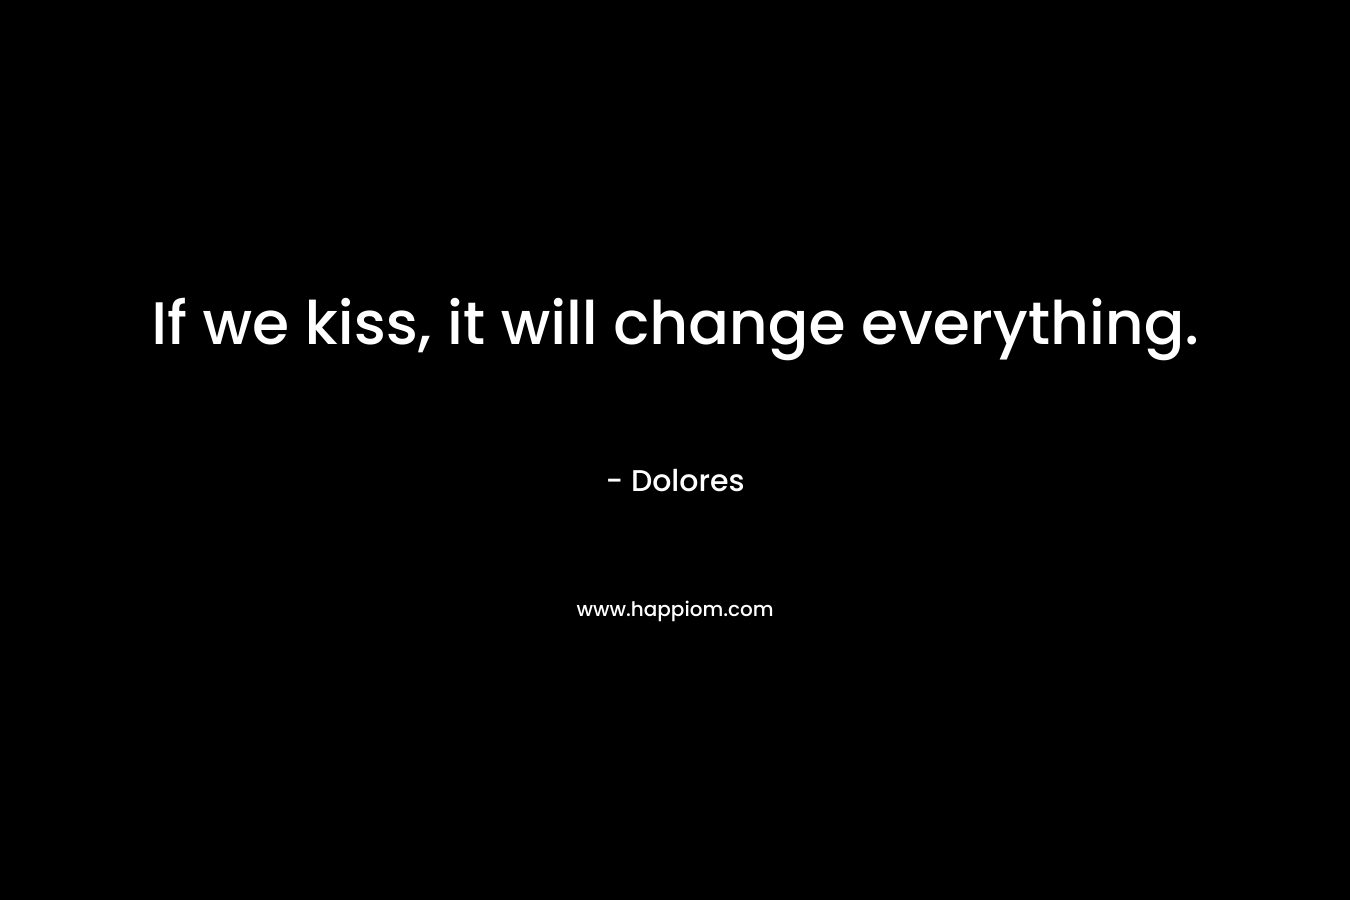 If we kiss, it will change everything.